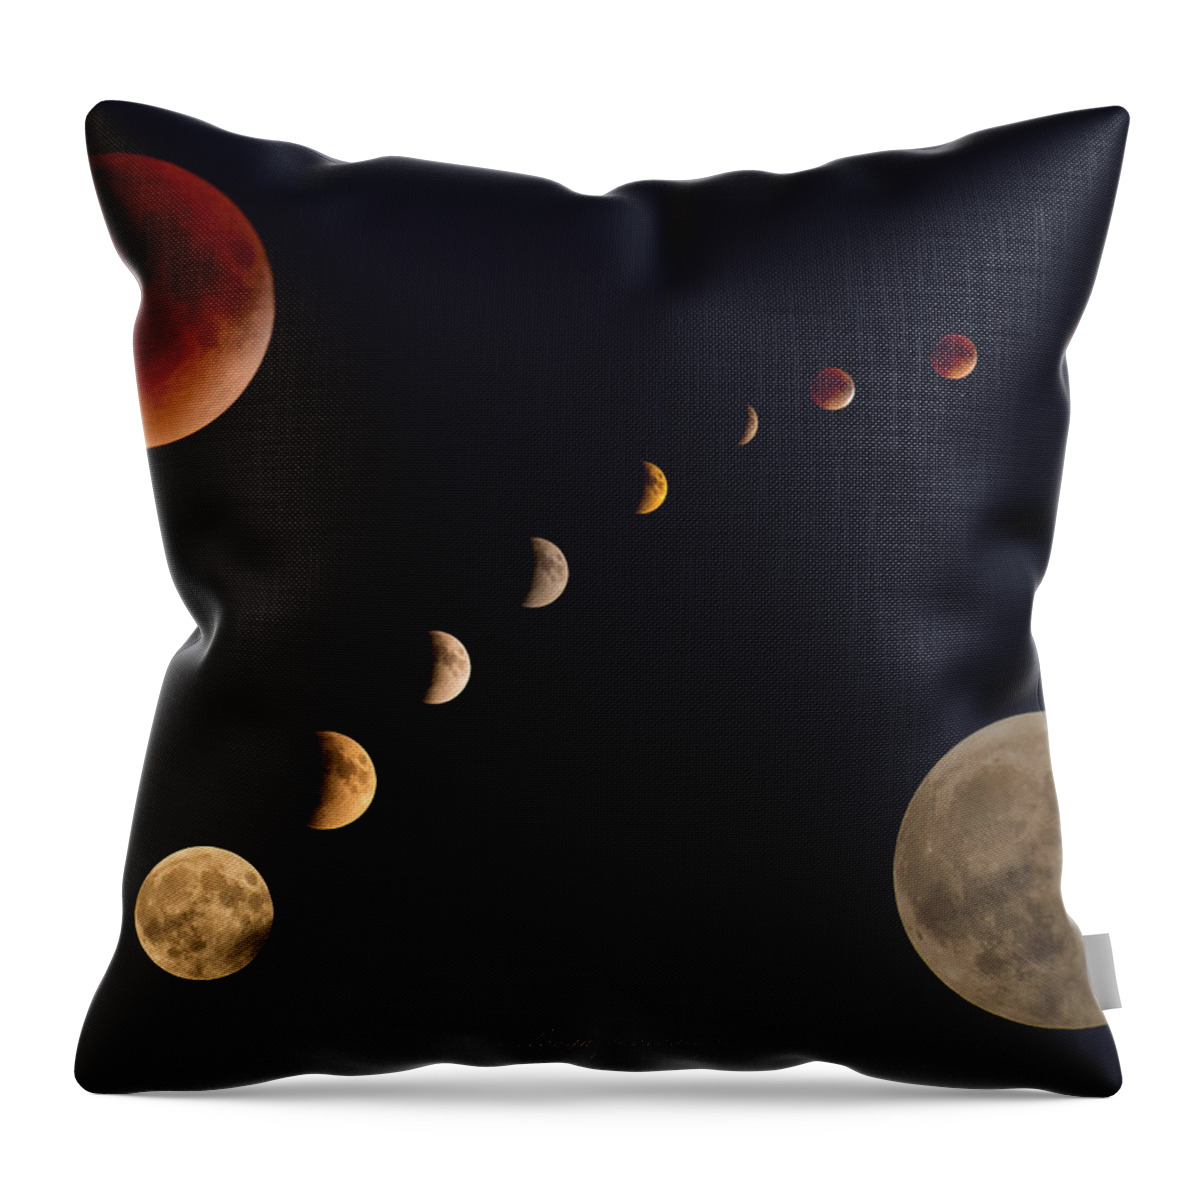 Full Moon Throw Pillow featuring the photograph Eclipse by Mary Clough